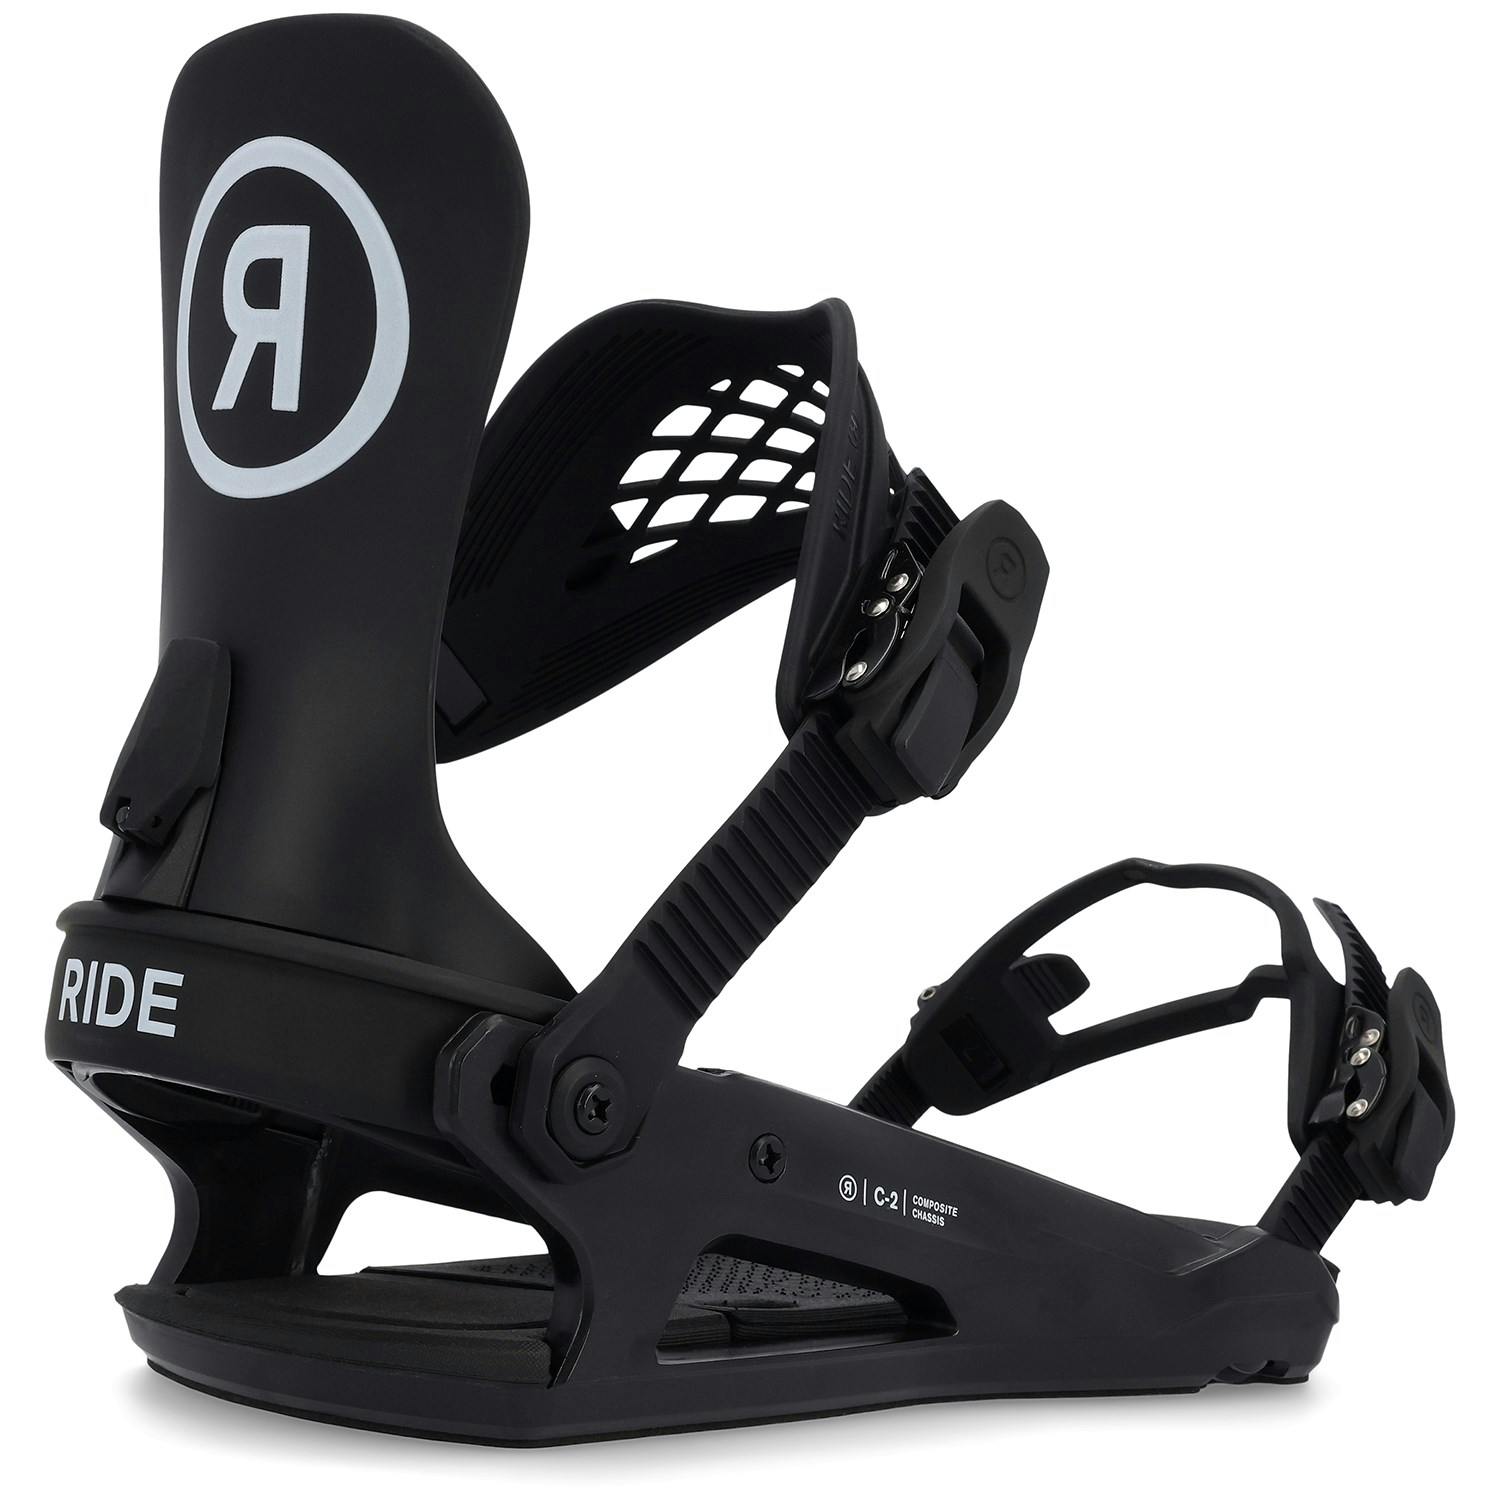 humor Pole trade Top 10 Snowboard Bindings under $200 | Curated.com